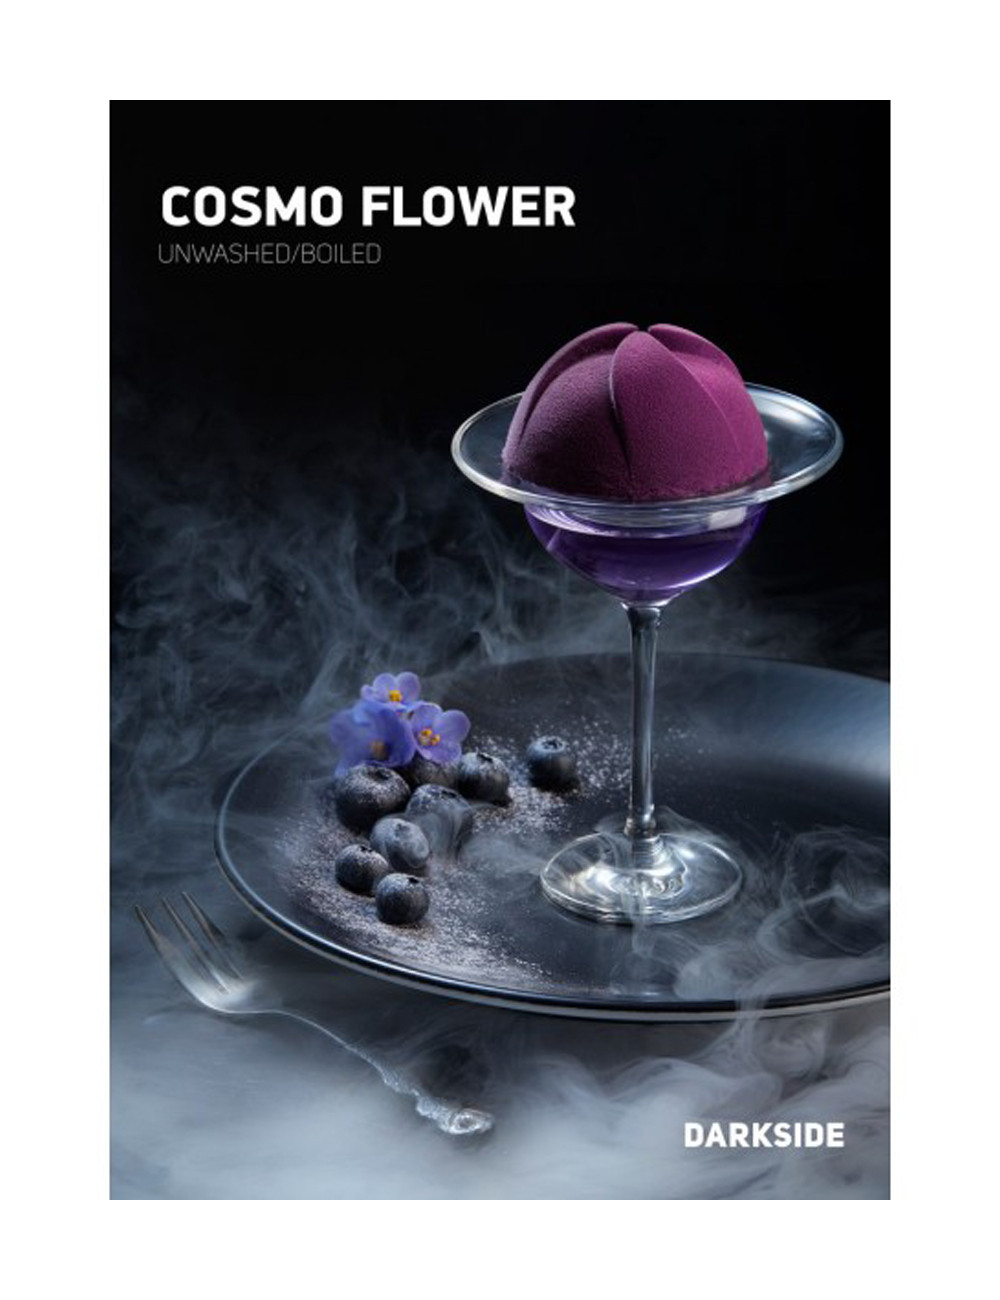 Cosmo Flower